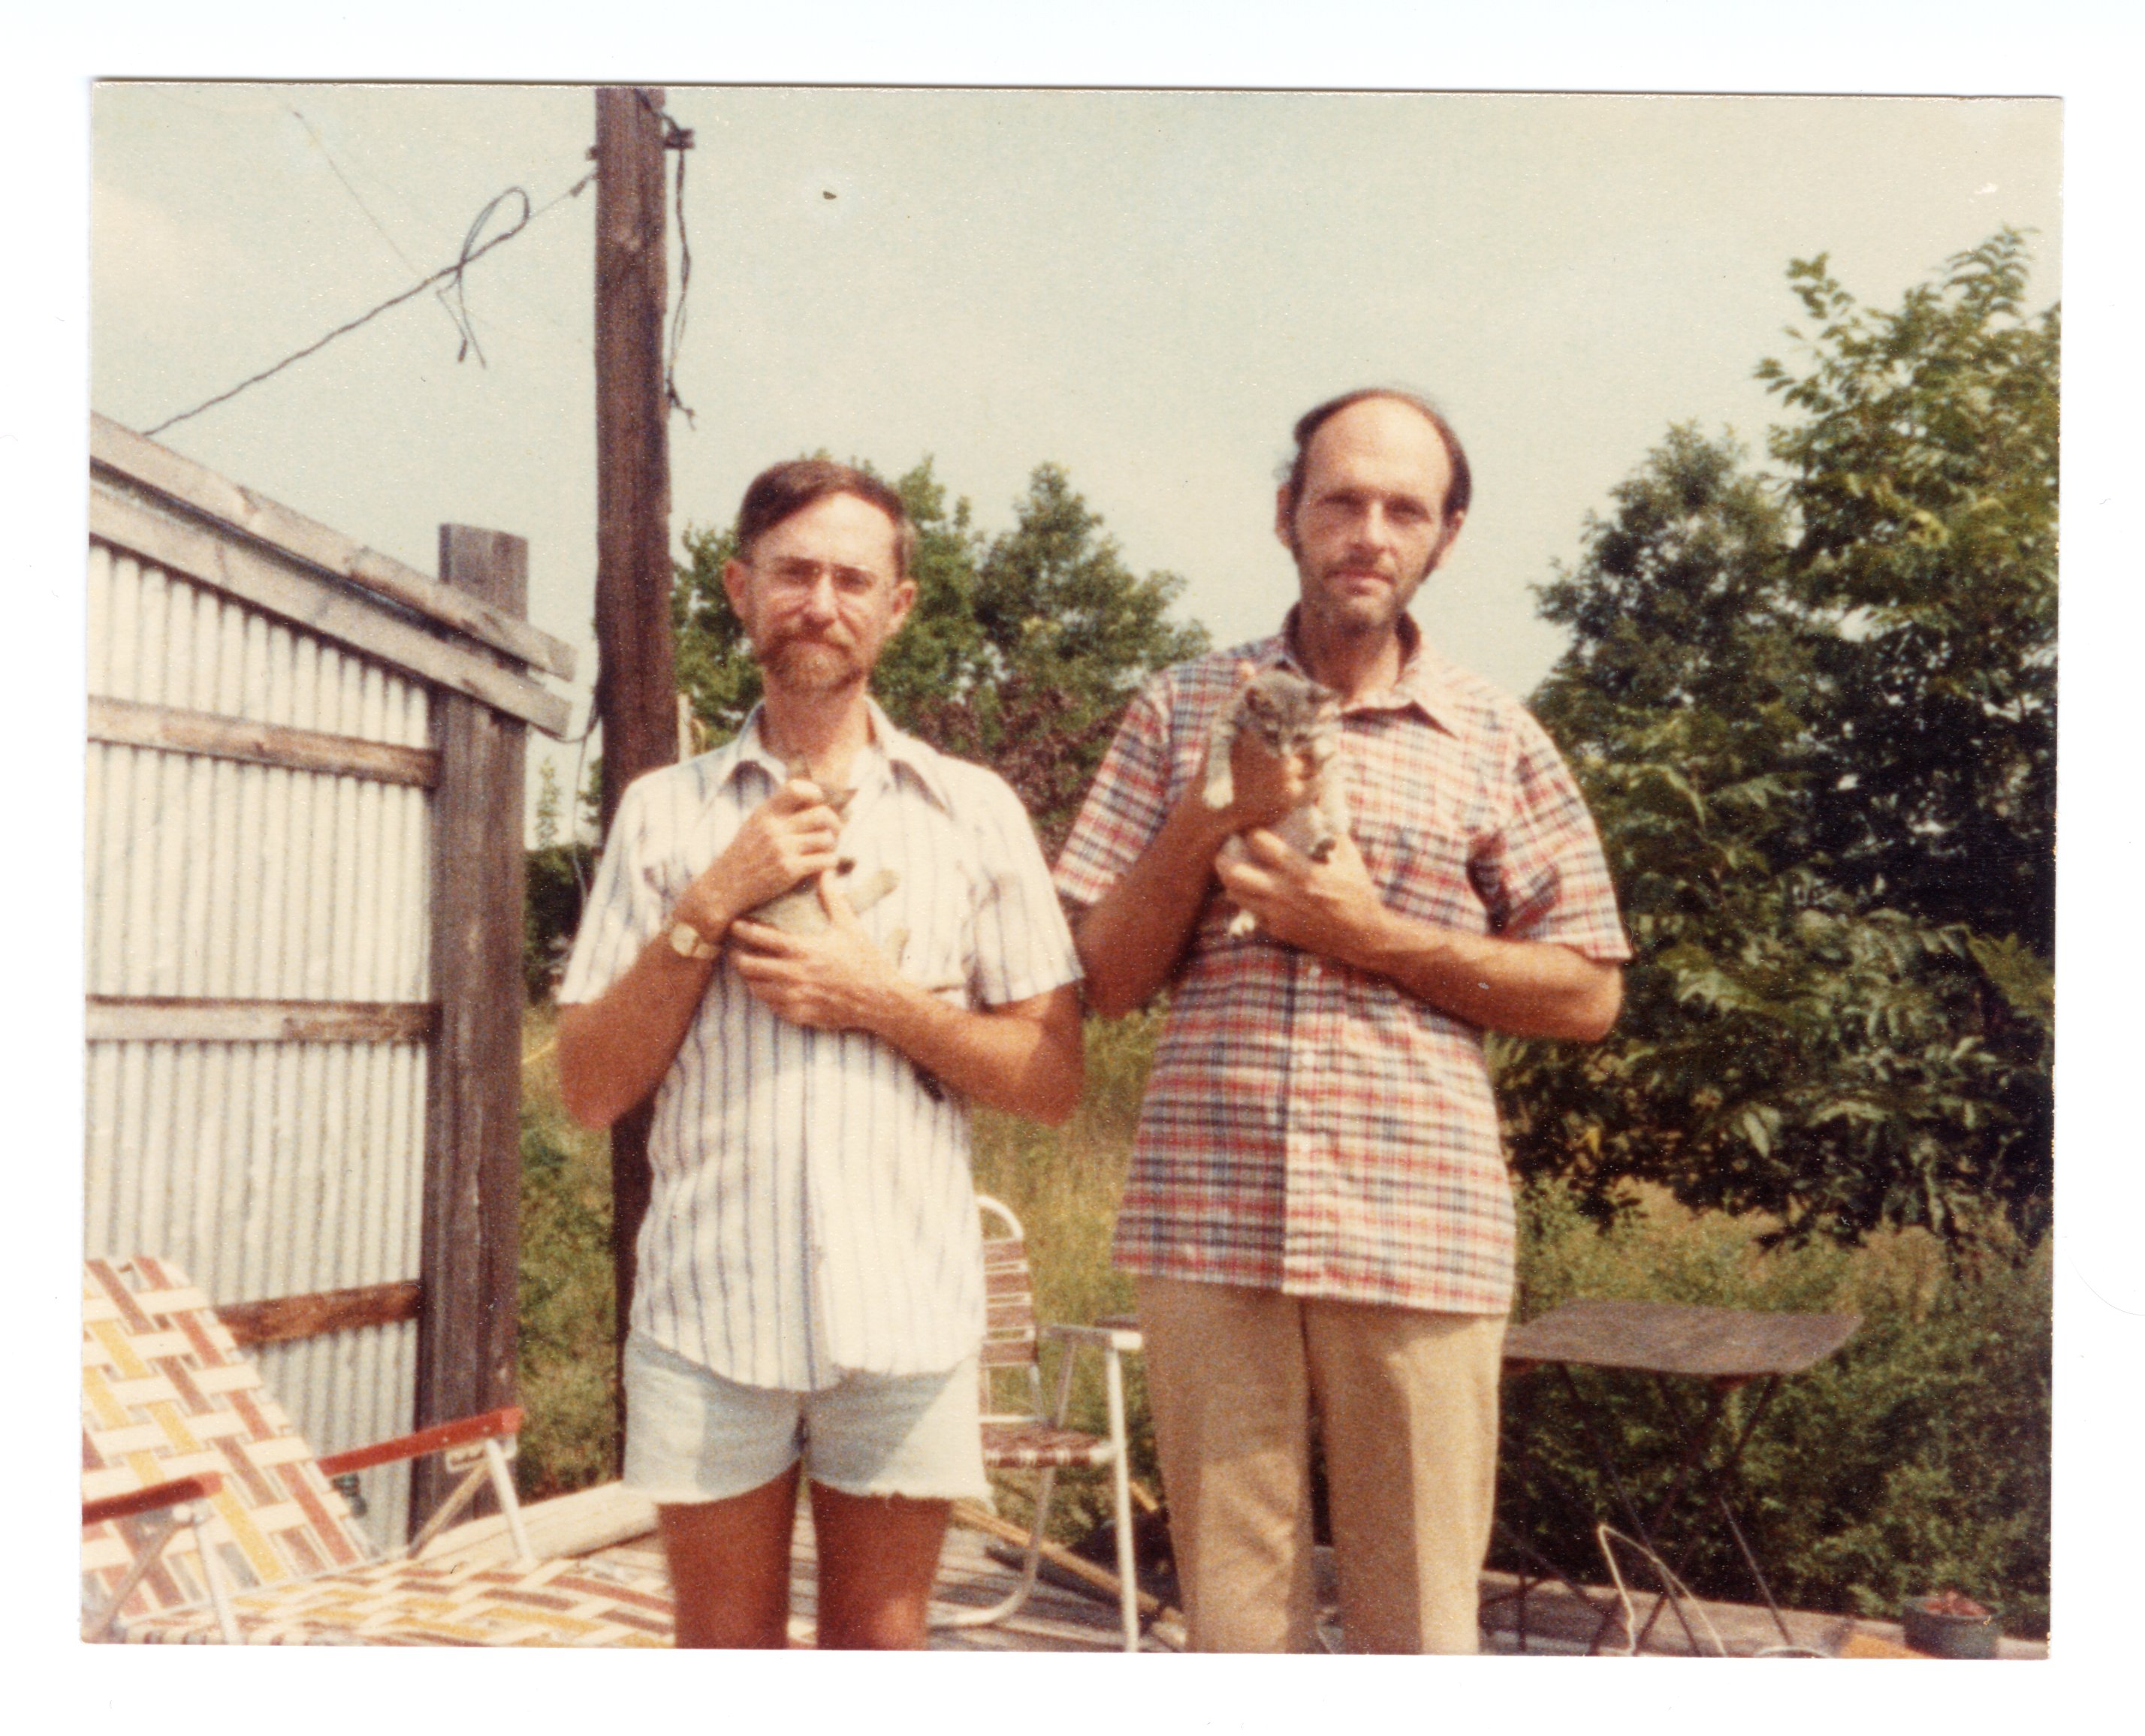 Two men stand in front of a fence and are holding small kittens.